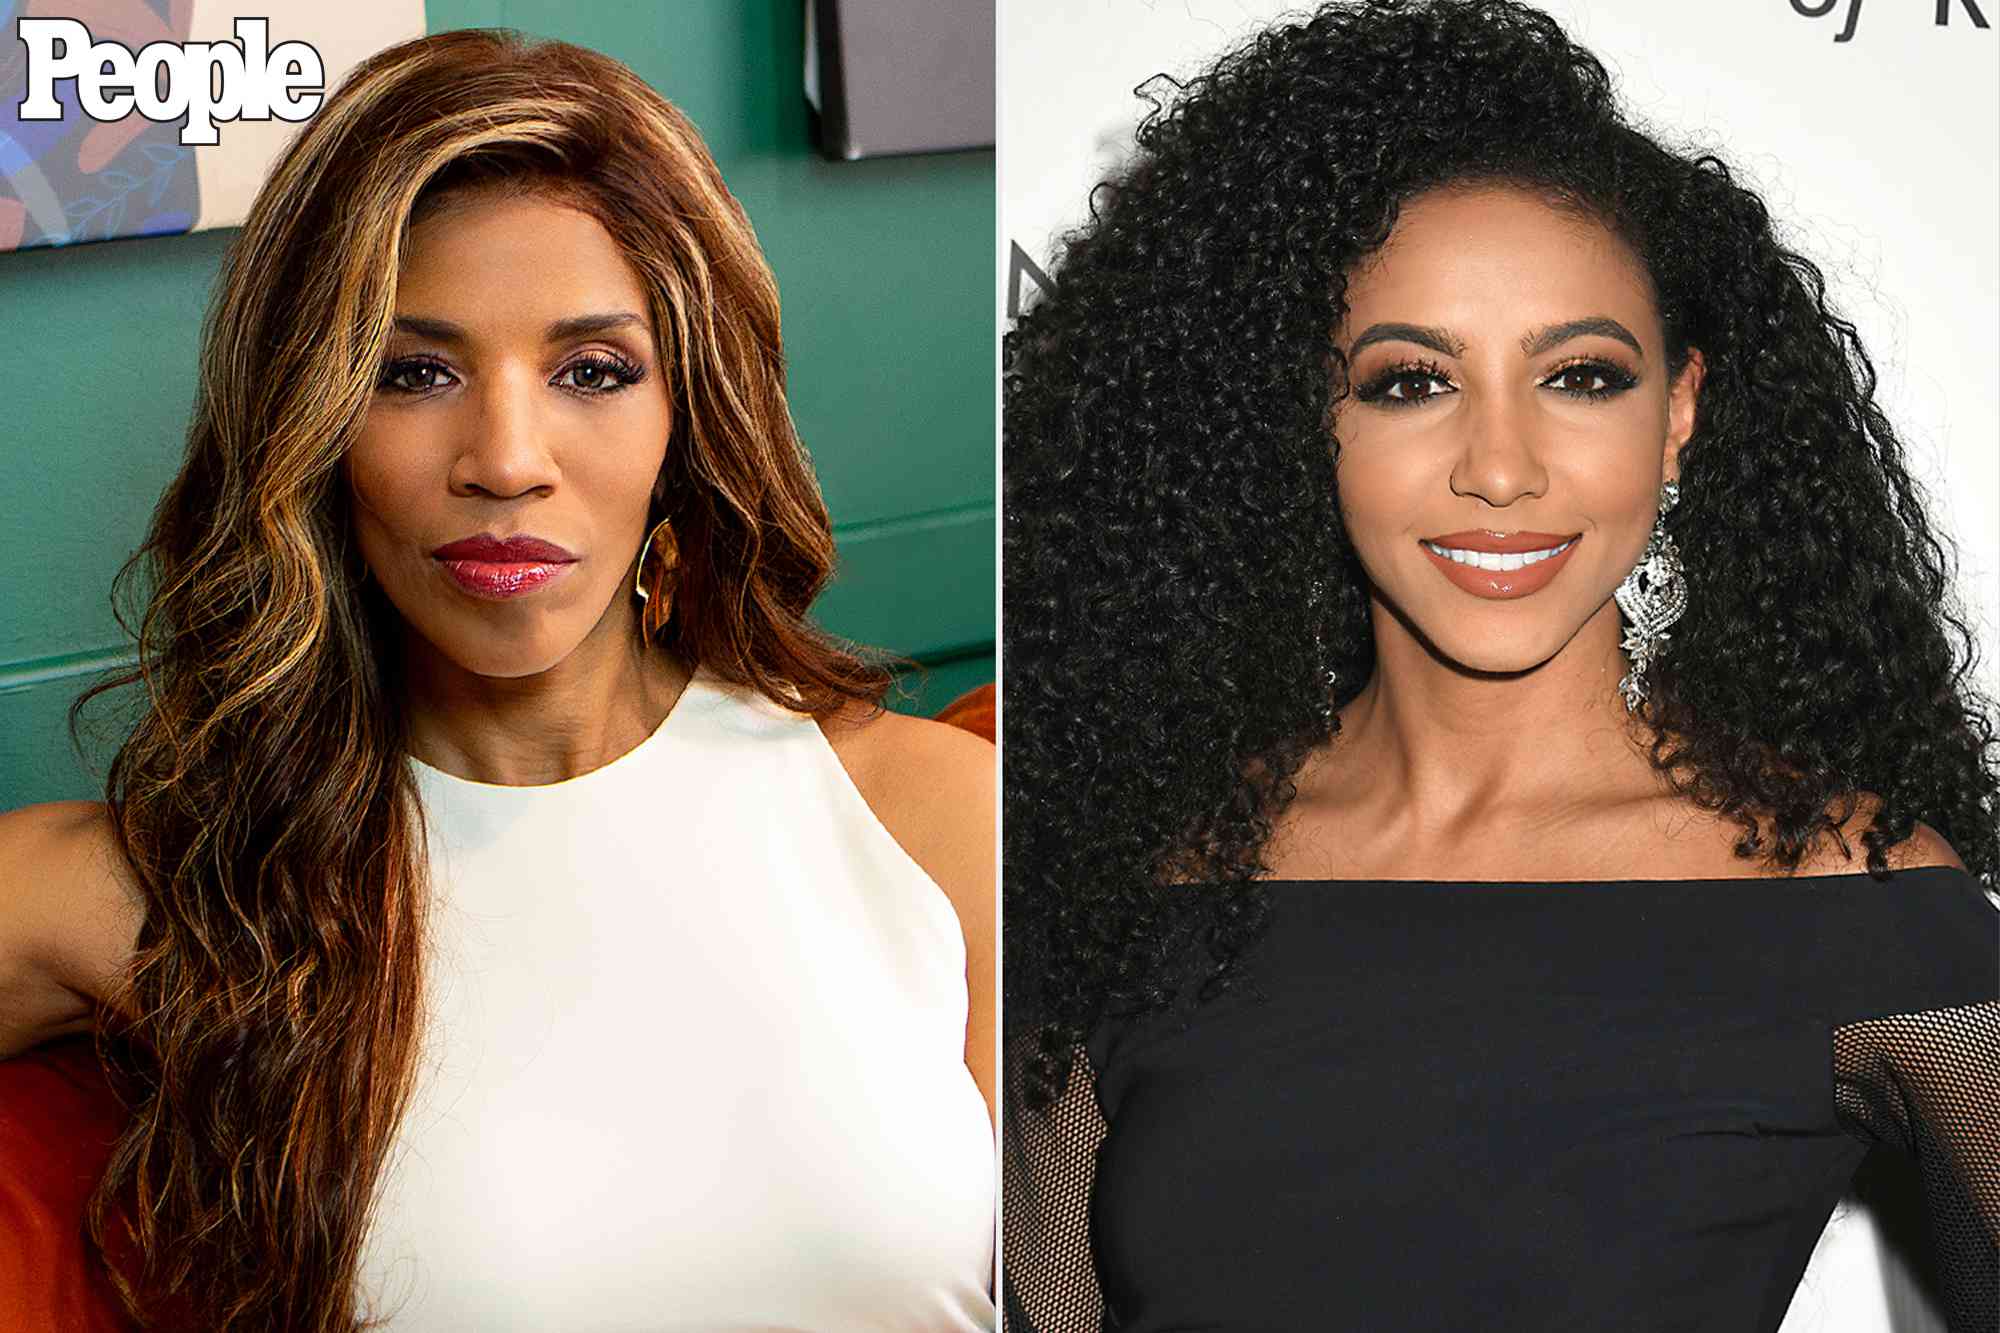 Cheslie Kryst’s Mom Opens Up About the Former Miss USA’s 2022 Suicide: 'I Can't Let Guilt Erase What We Had' (Exclusive)